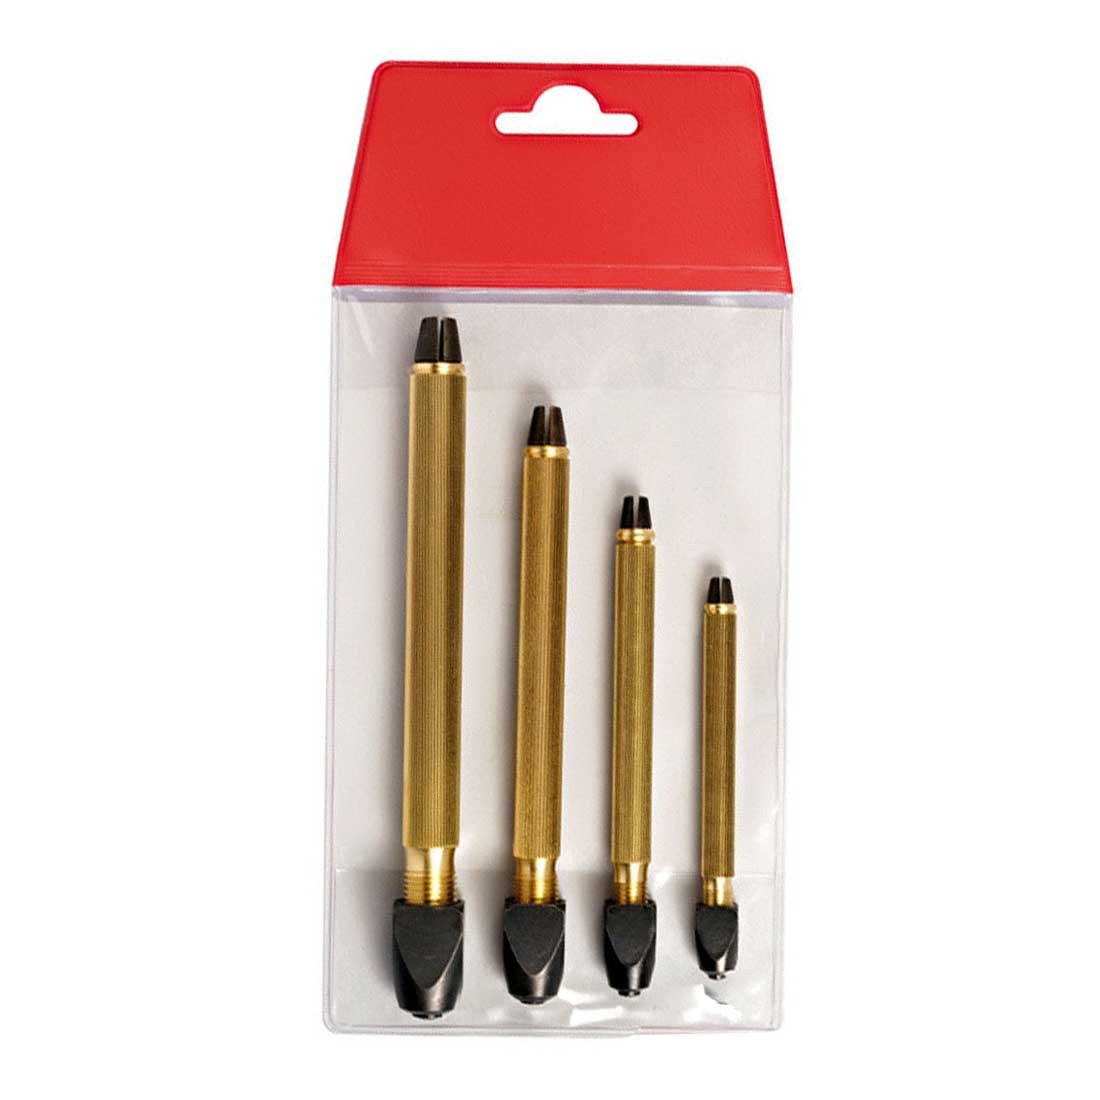 Horotec MSA02.026 Assortment of Brass Pin Vice with Square Head